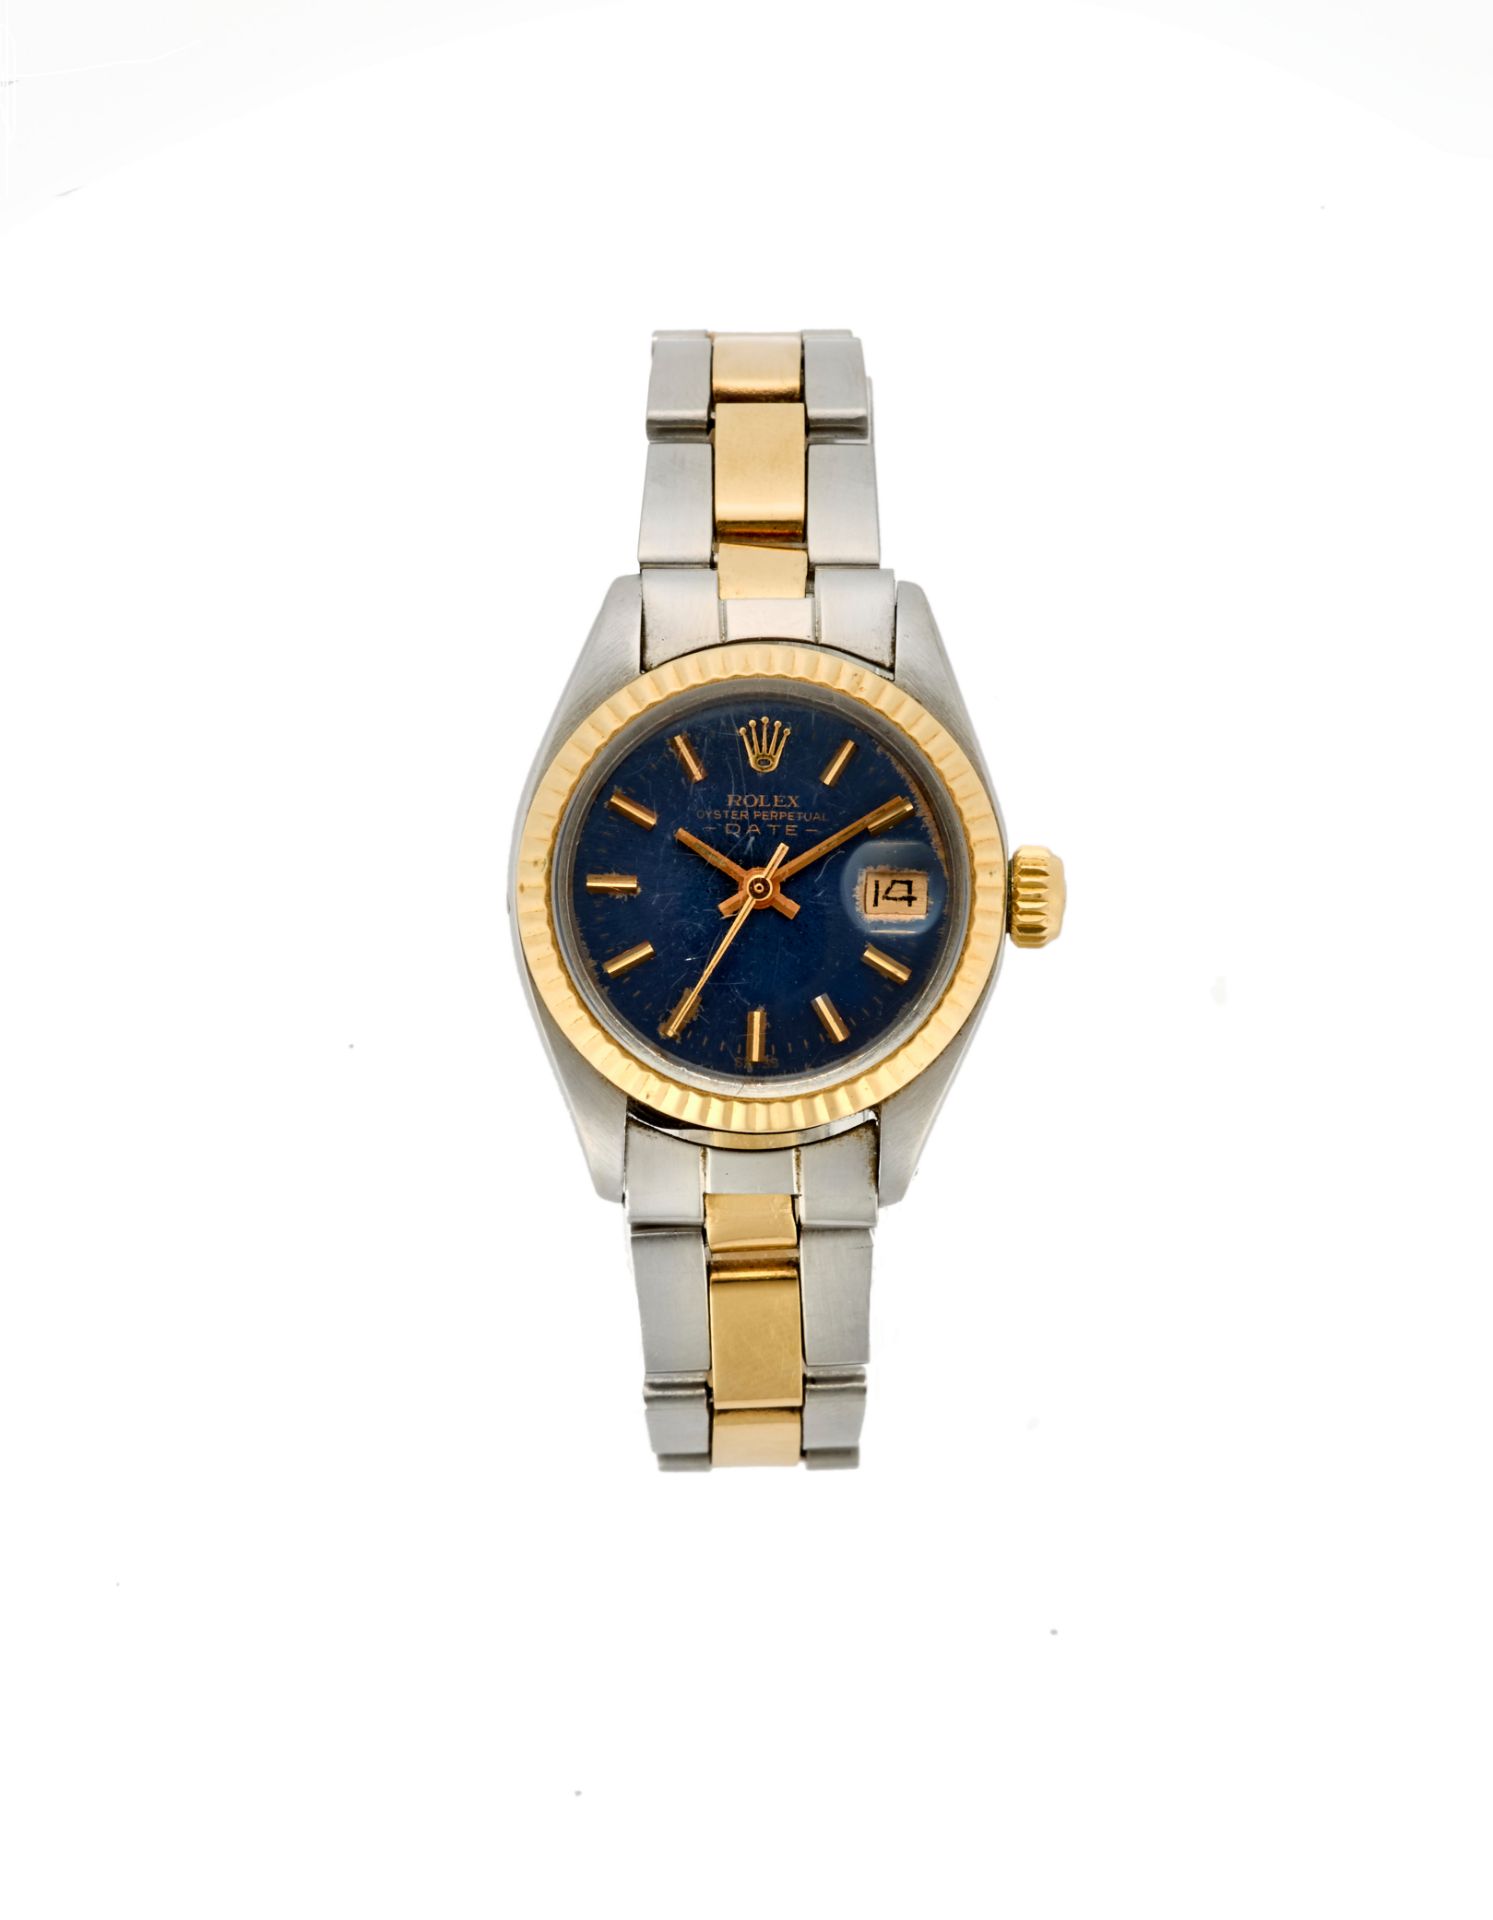 Rolex, Lady DateJust Ref. 6917Lady's steel and gold wristwatchYear 1974Dial, movement and case